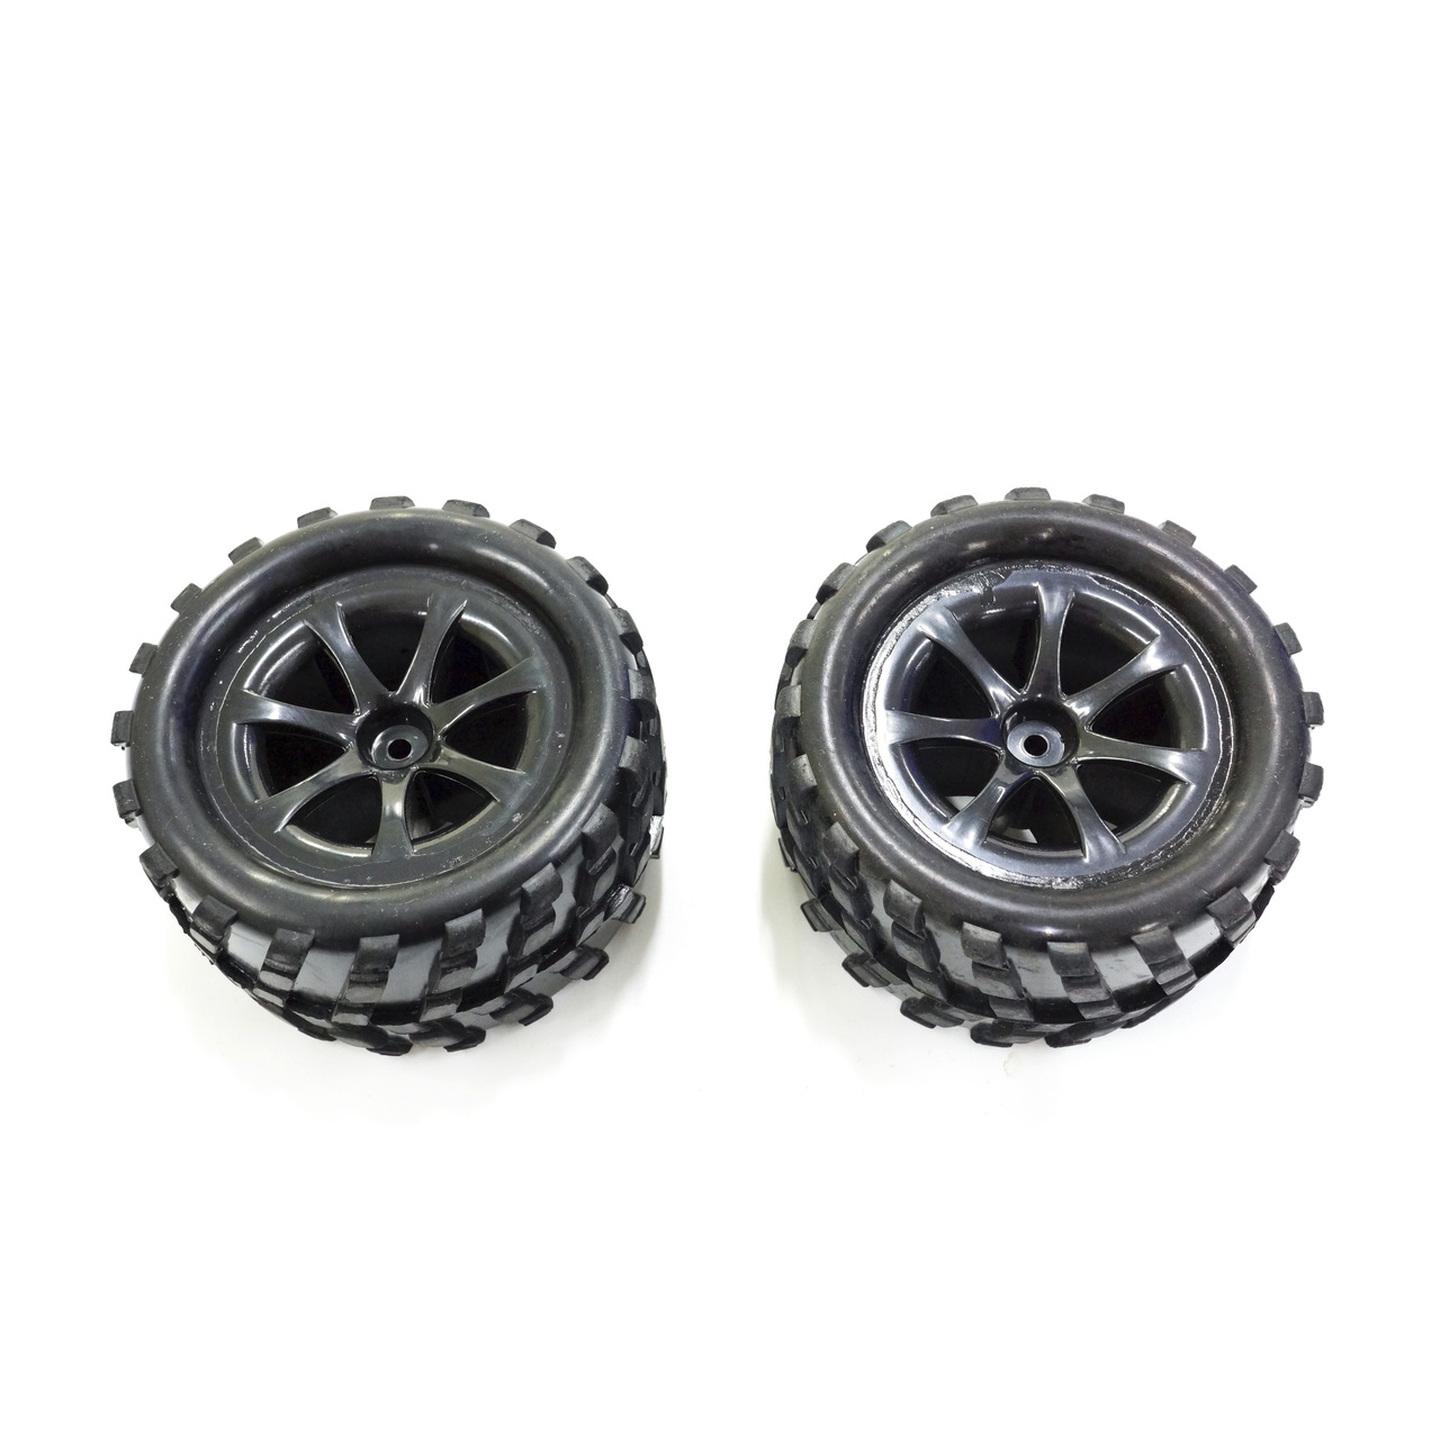 Pack of 2 Rear Tyres for GT3788 Truck